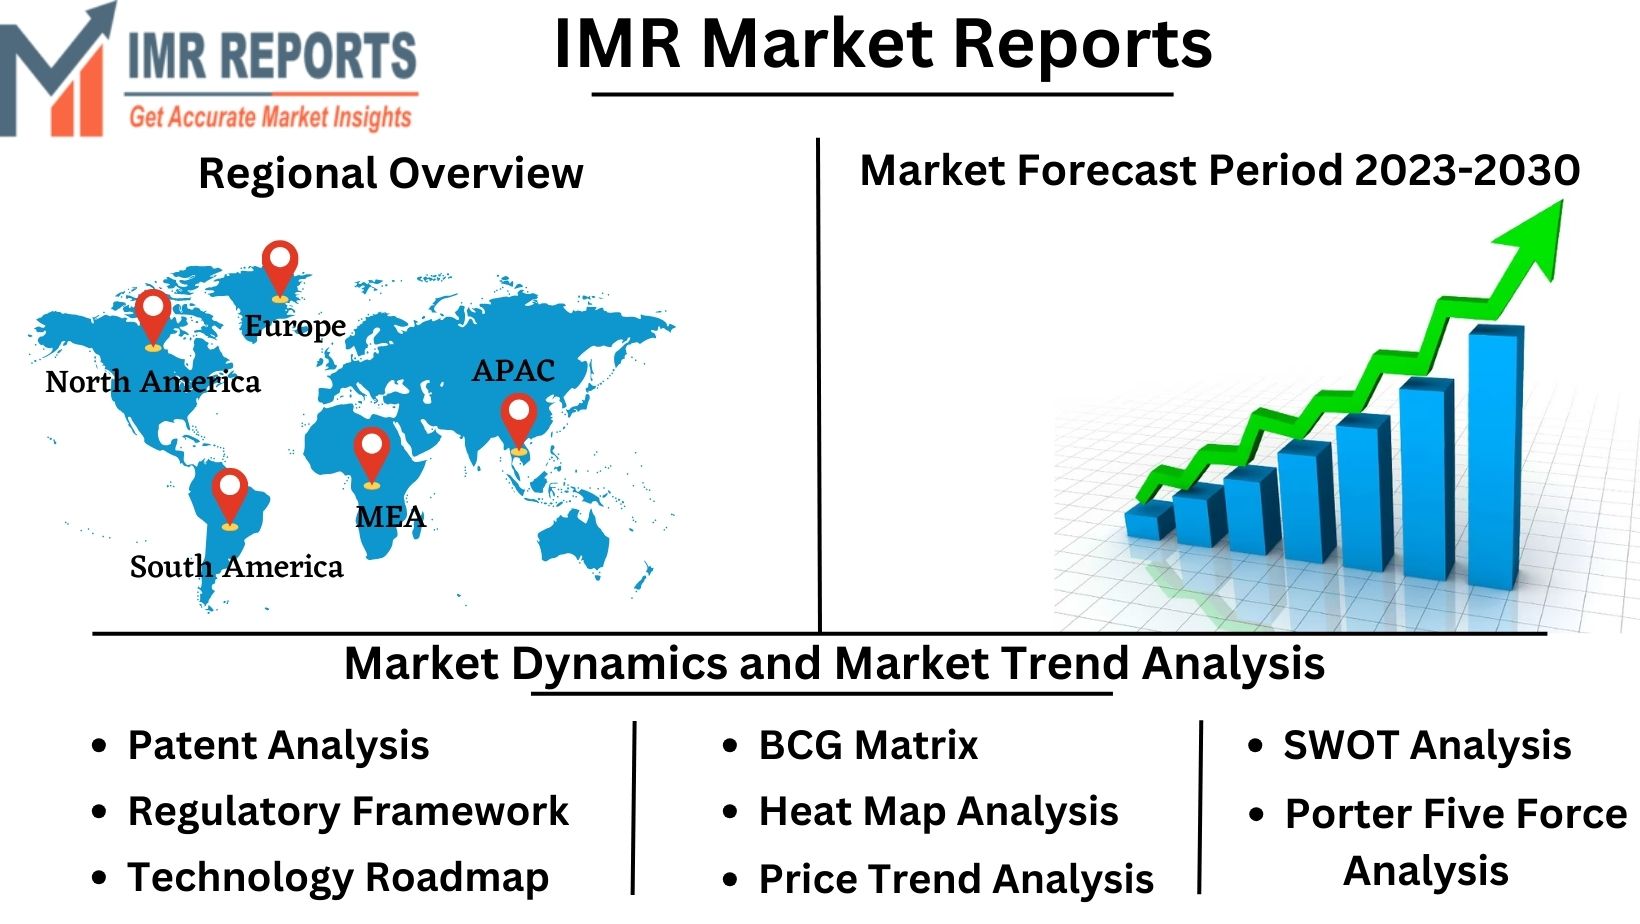 IMR_Market_Reports_(1)91